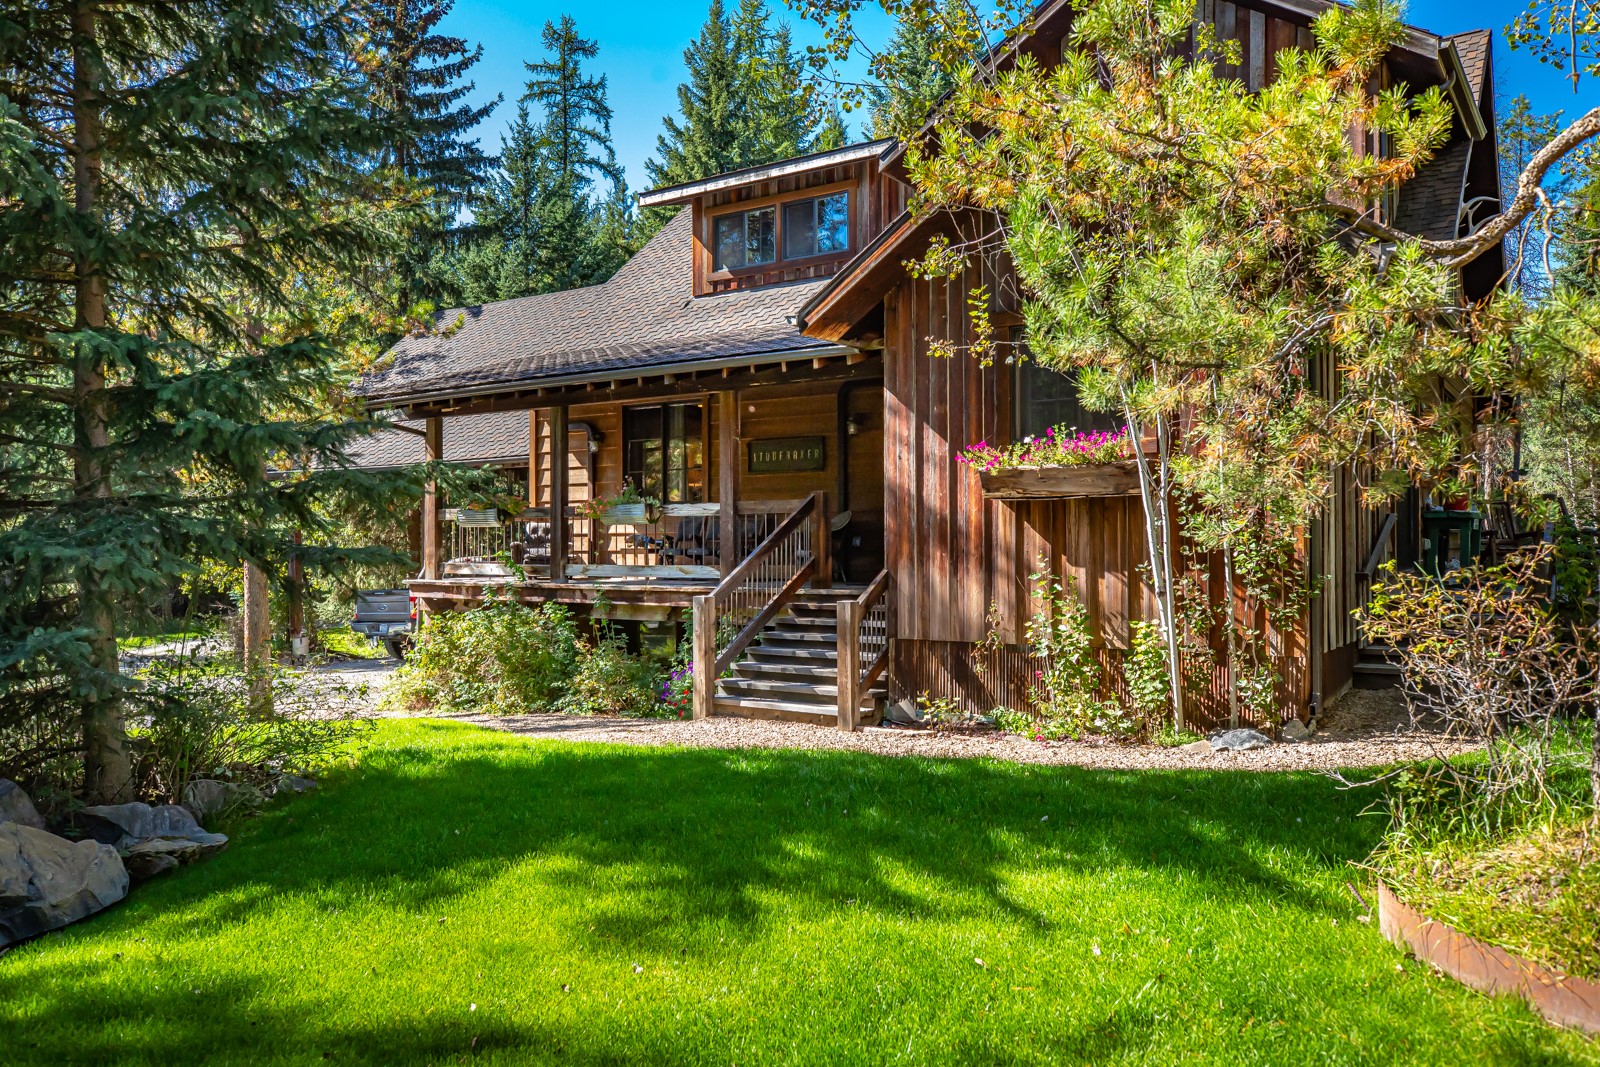 97 Aspen Bluff is the perfect blend of Montana rustic and down home comfort.  Offering a private wooded setting on just under 9 acres and only 10 minutes from downtown Whitefish, this home showcases custom handcrafted woodwork inside and out with all the Montana charm you can ask for.  Property has plenty of outbuildings including a barn, tack room/workshop, woodshed/play cabin, trapping shed and 2 guest apartments.  Home offers a main floor primary bedroom and living option, open living floor plan with vaulted ceilings and plenty of creative rustic touches with a total of 4 bedrooms, 4 bathrooms, 2 living rooms and a large loft area.  Each guest house has one bedroom, full kitchen, 3/4 bath and laundry.  Call Linda Chauner at 406-250-1192 or your real estate professional.